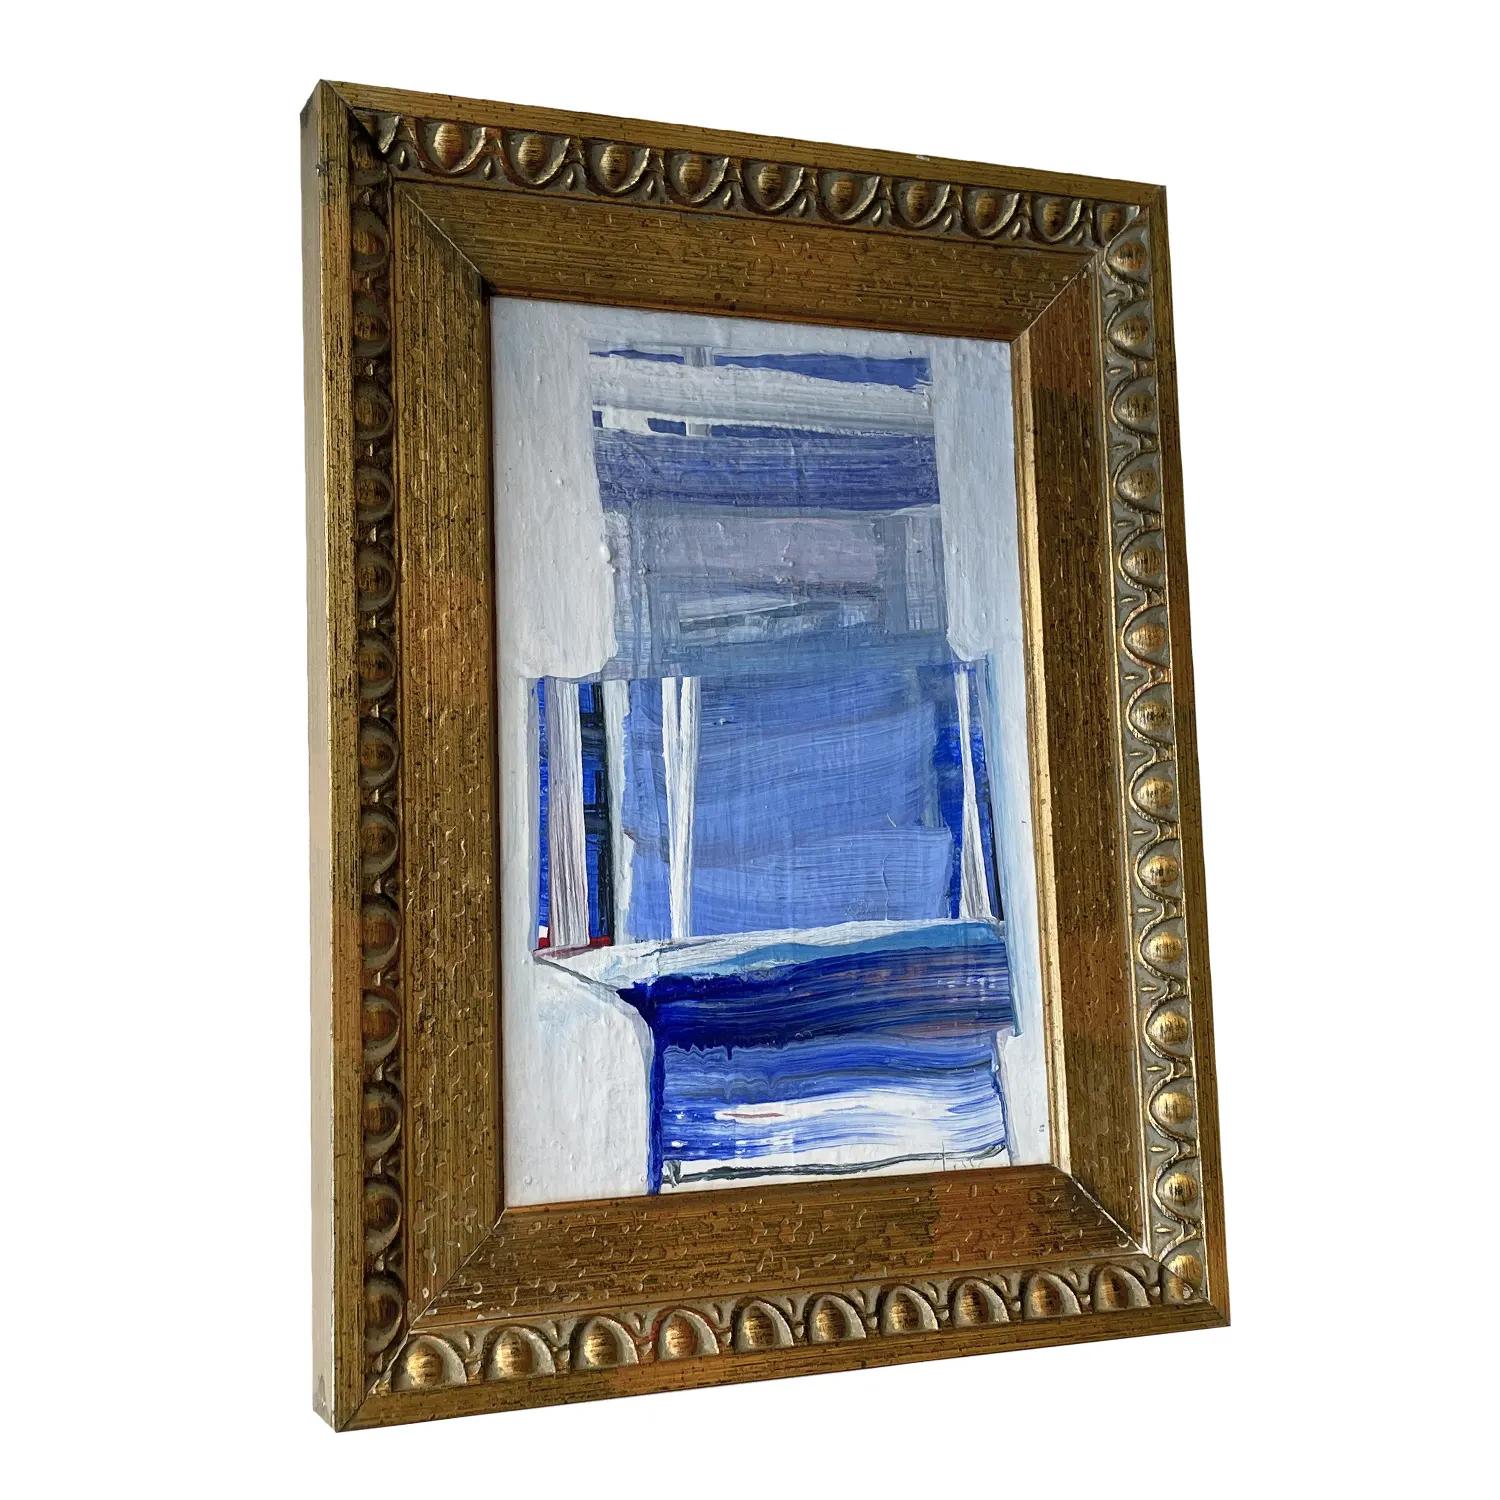 A light-blue, vintage Mid-Century Modern French abstract oil on wood painting, painted by Daniel Clesse in good condition. Signed on the lower right. Wear consistent with age and use. Dated 1991, Paris, France.

Without the frame: 15.75